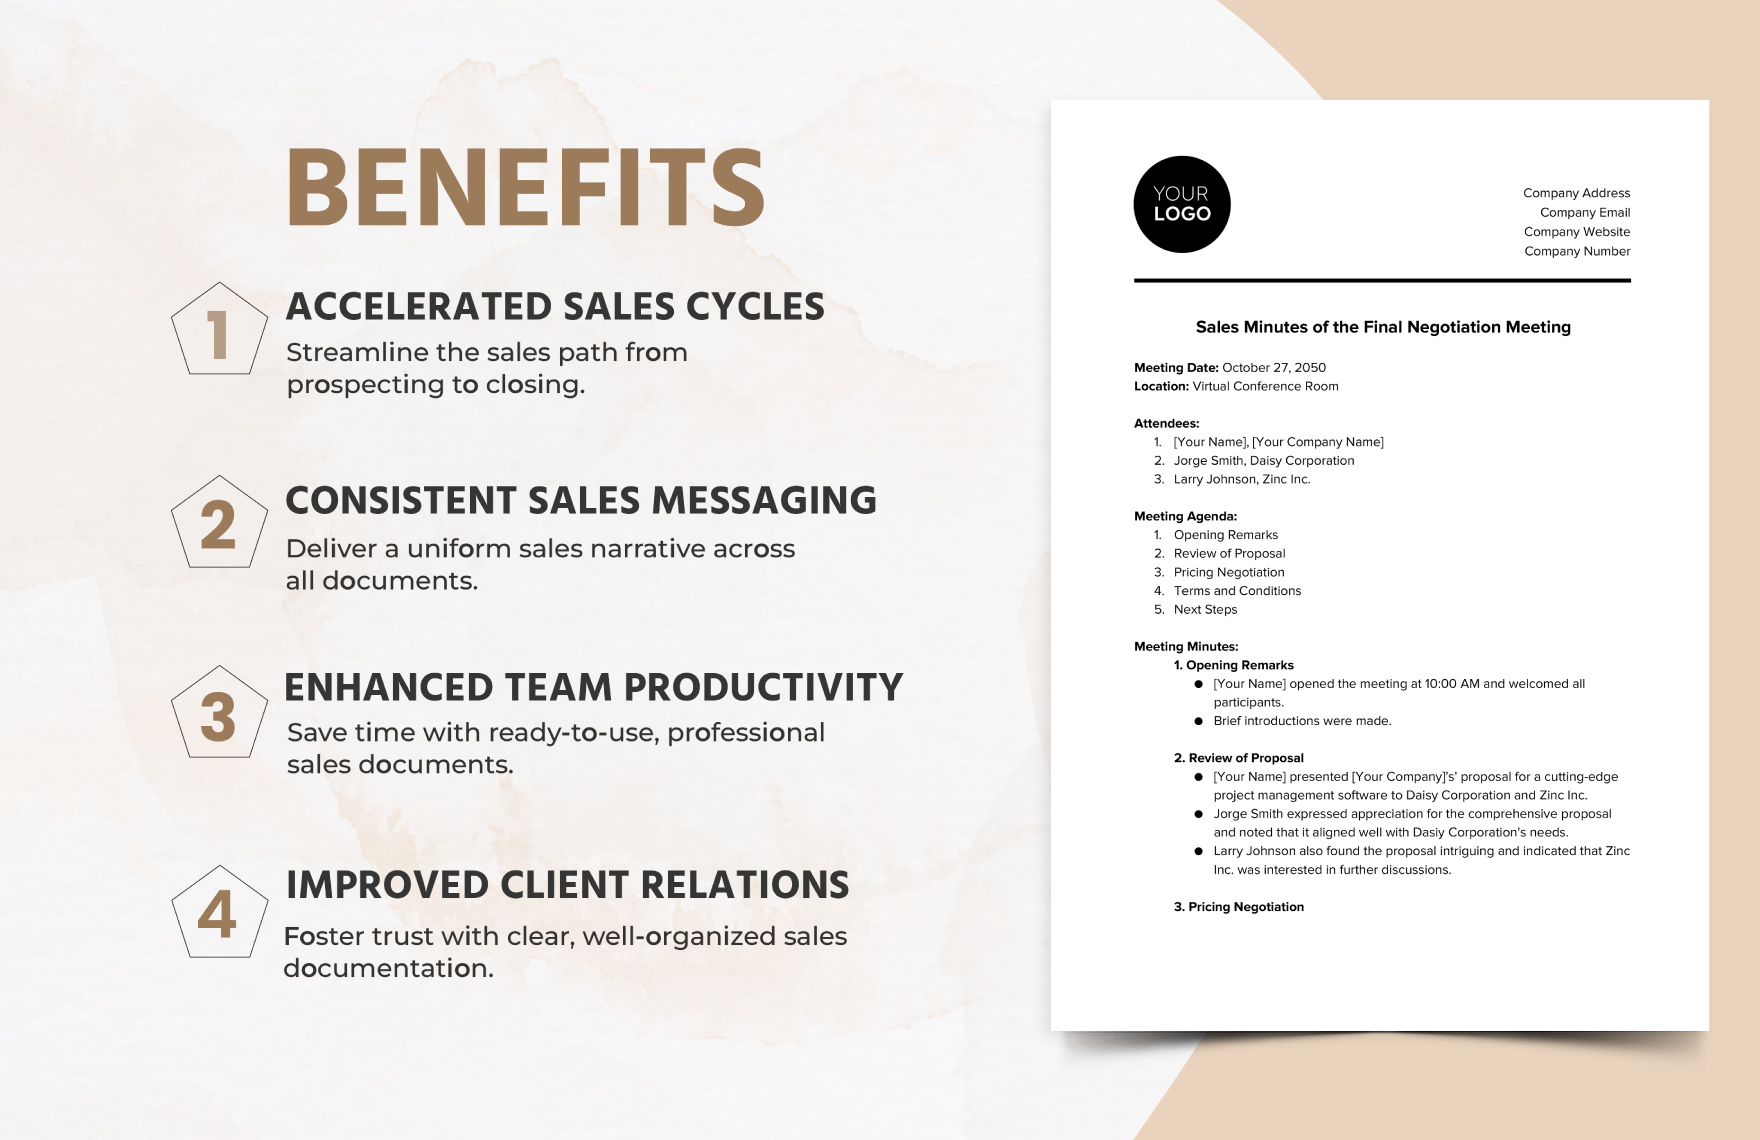 Sales Minute of Final Negotiation Meeting Template